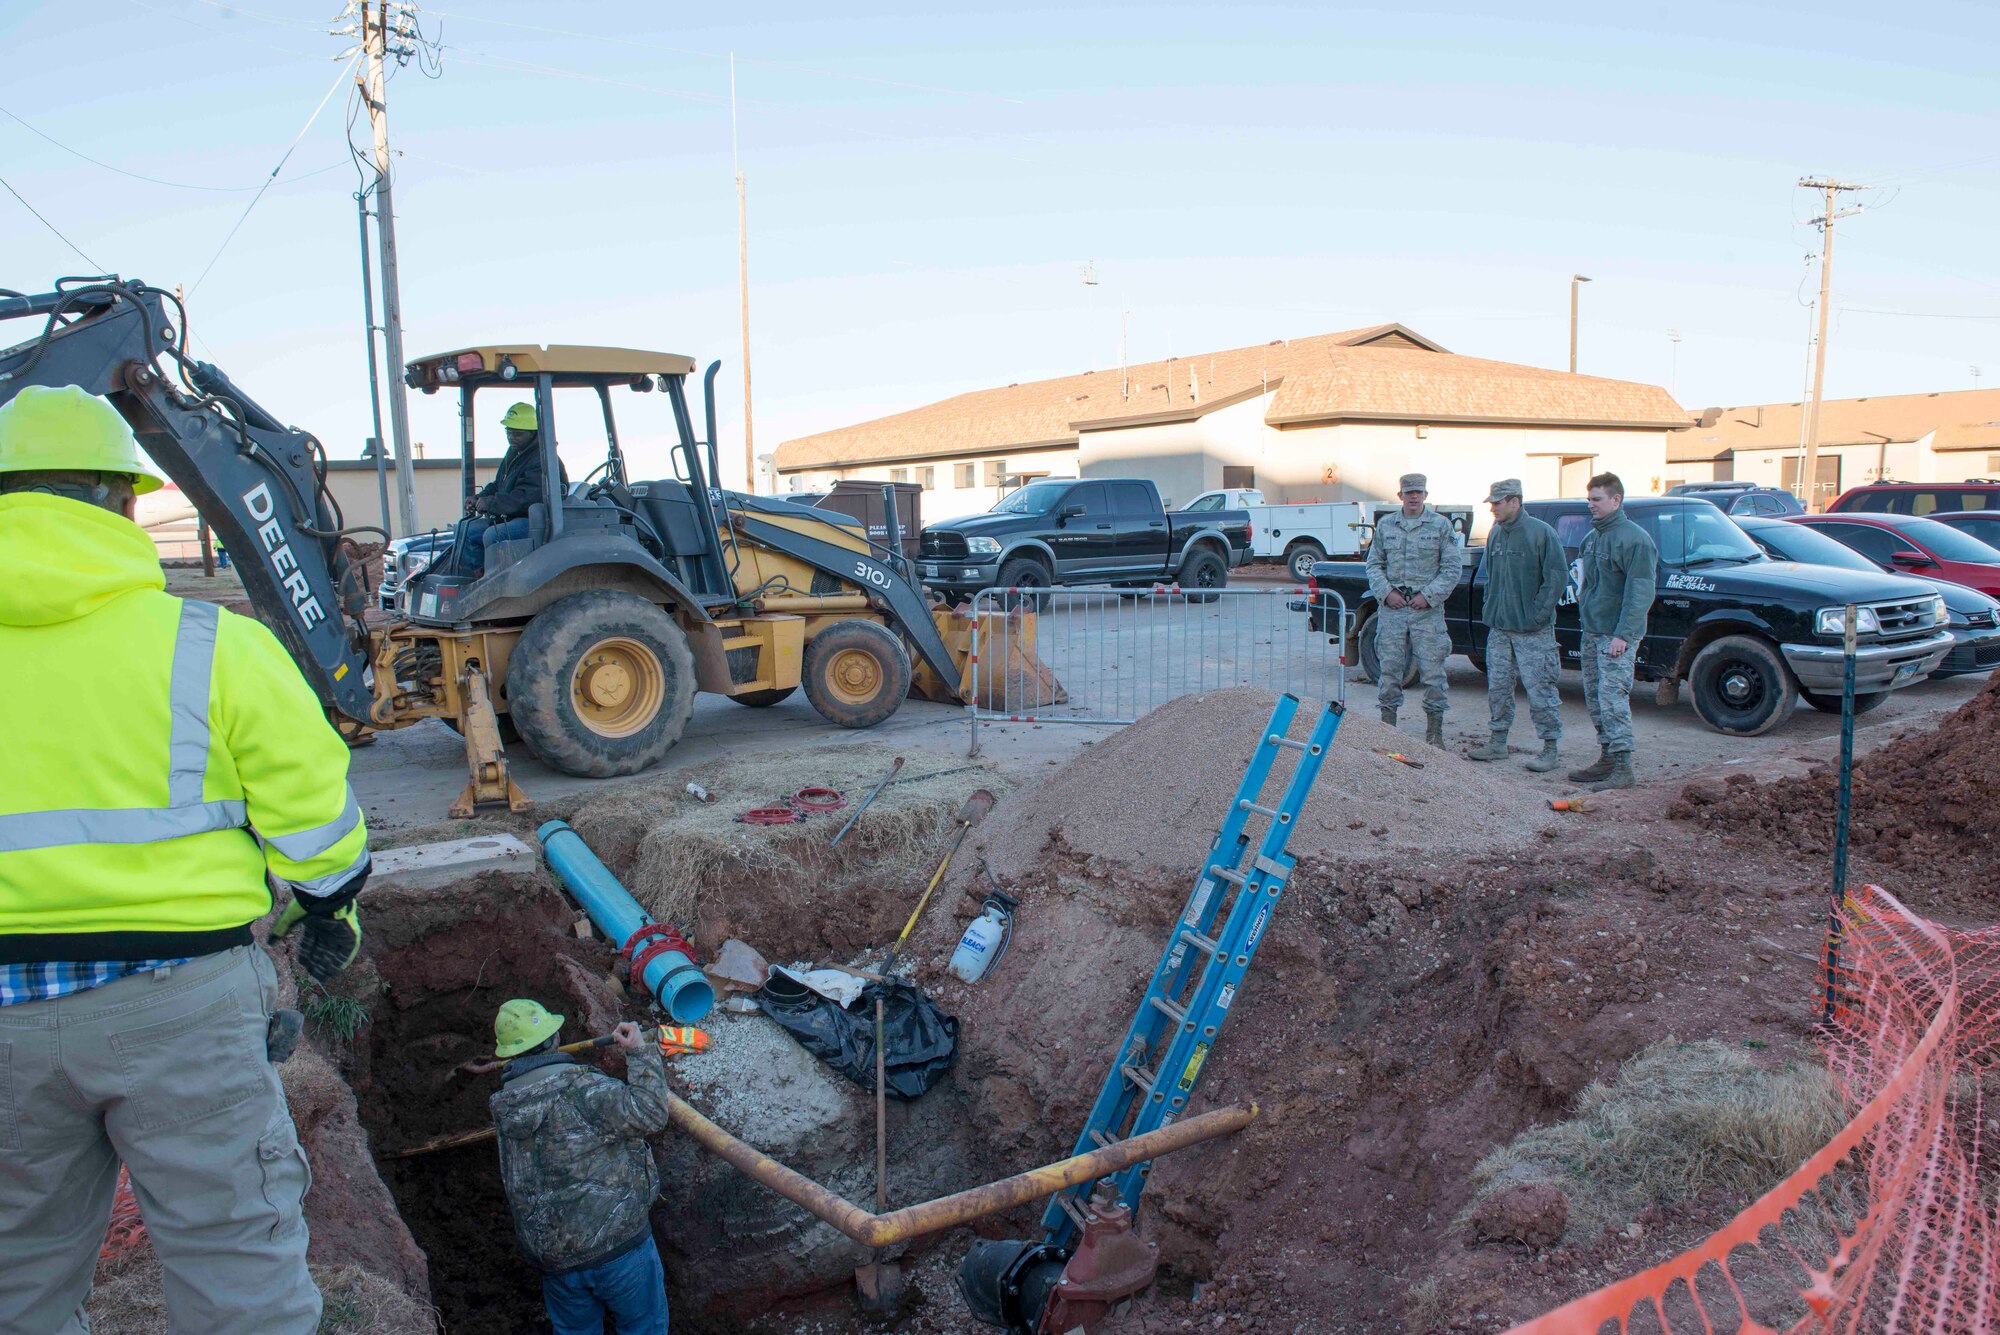 U.S. Air Force Airmen assigned to the 7th Civil Engineer Squadron oversee the removal of dirt from around a water pipe at Dyess Air Force Base, Texas, Jan. 31, 2017. The 7th CES has multiple projects on base—one of those is to install new water pipes to improve the quality of life for Dyess Airmen and families. (U.S. Air Force photo by Airman 1st Class Austin Mayfield)